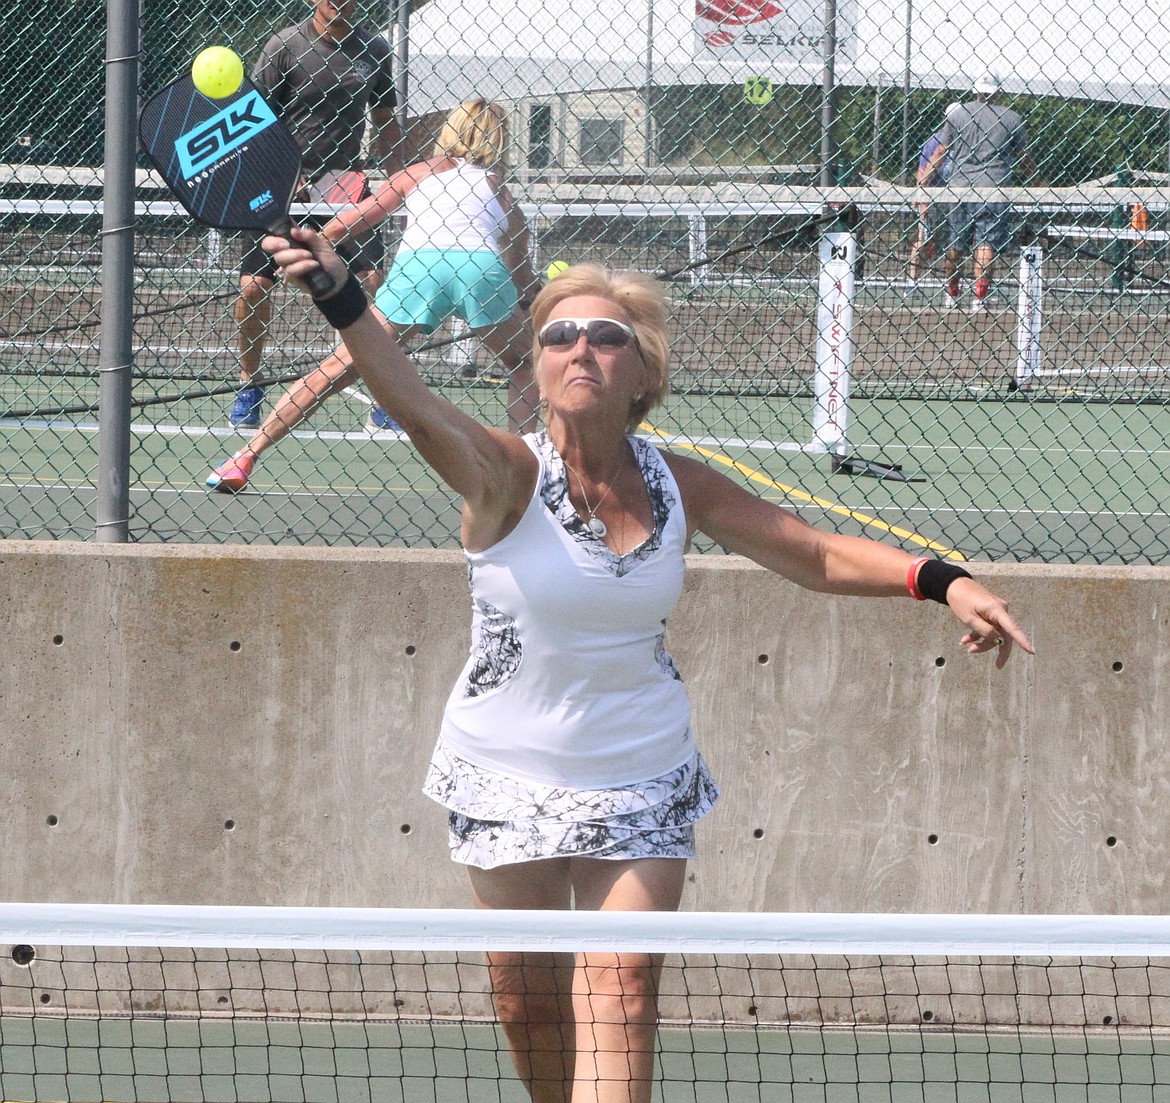 MARK NELKE/Press
Becky Yates of Post Falls hits an overhead in the gold medal match in the mixed doubles 4.0 60-plus division at the Coeur d'Alene Classic pickleball tournament Saturday at Cherry Hill Park. The four-day tournament, which attracted 314 entrants, began Thursday with women's doubles, continued Friday and Saturday with mixed doubles brackets, and concludes today with men's doubles. Play today begins at 8 a.m., and figures to run through mid- to late-afternoon.